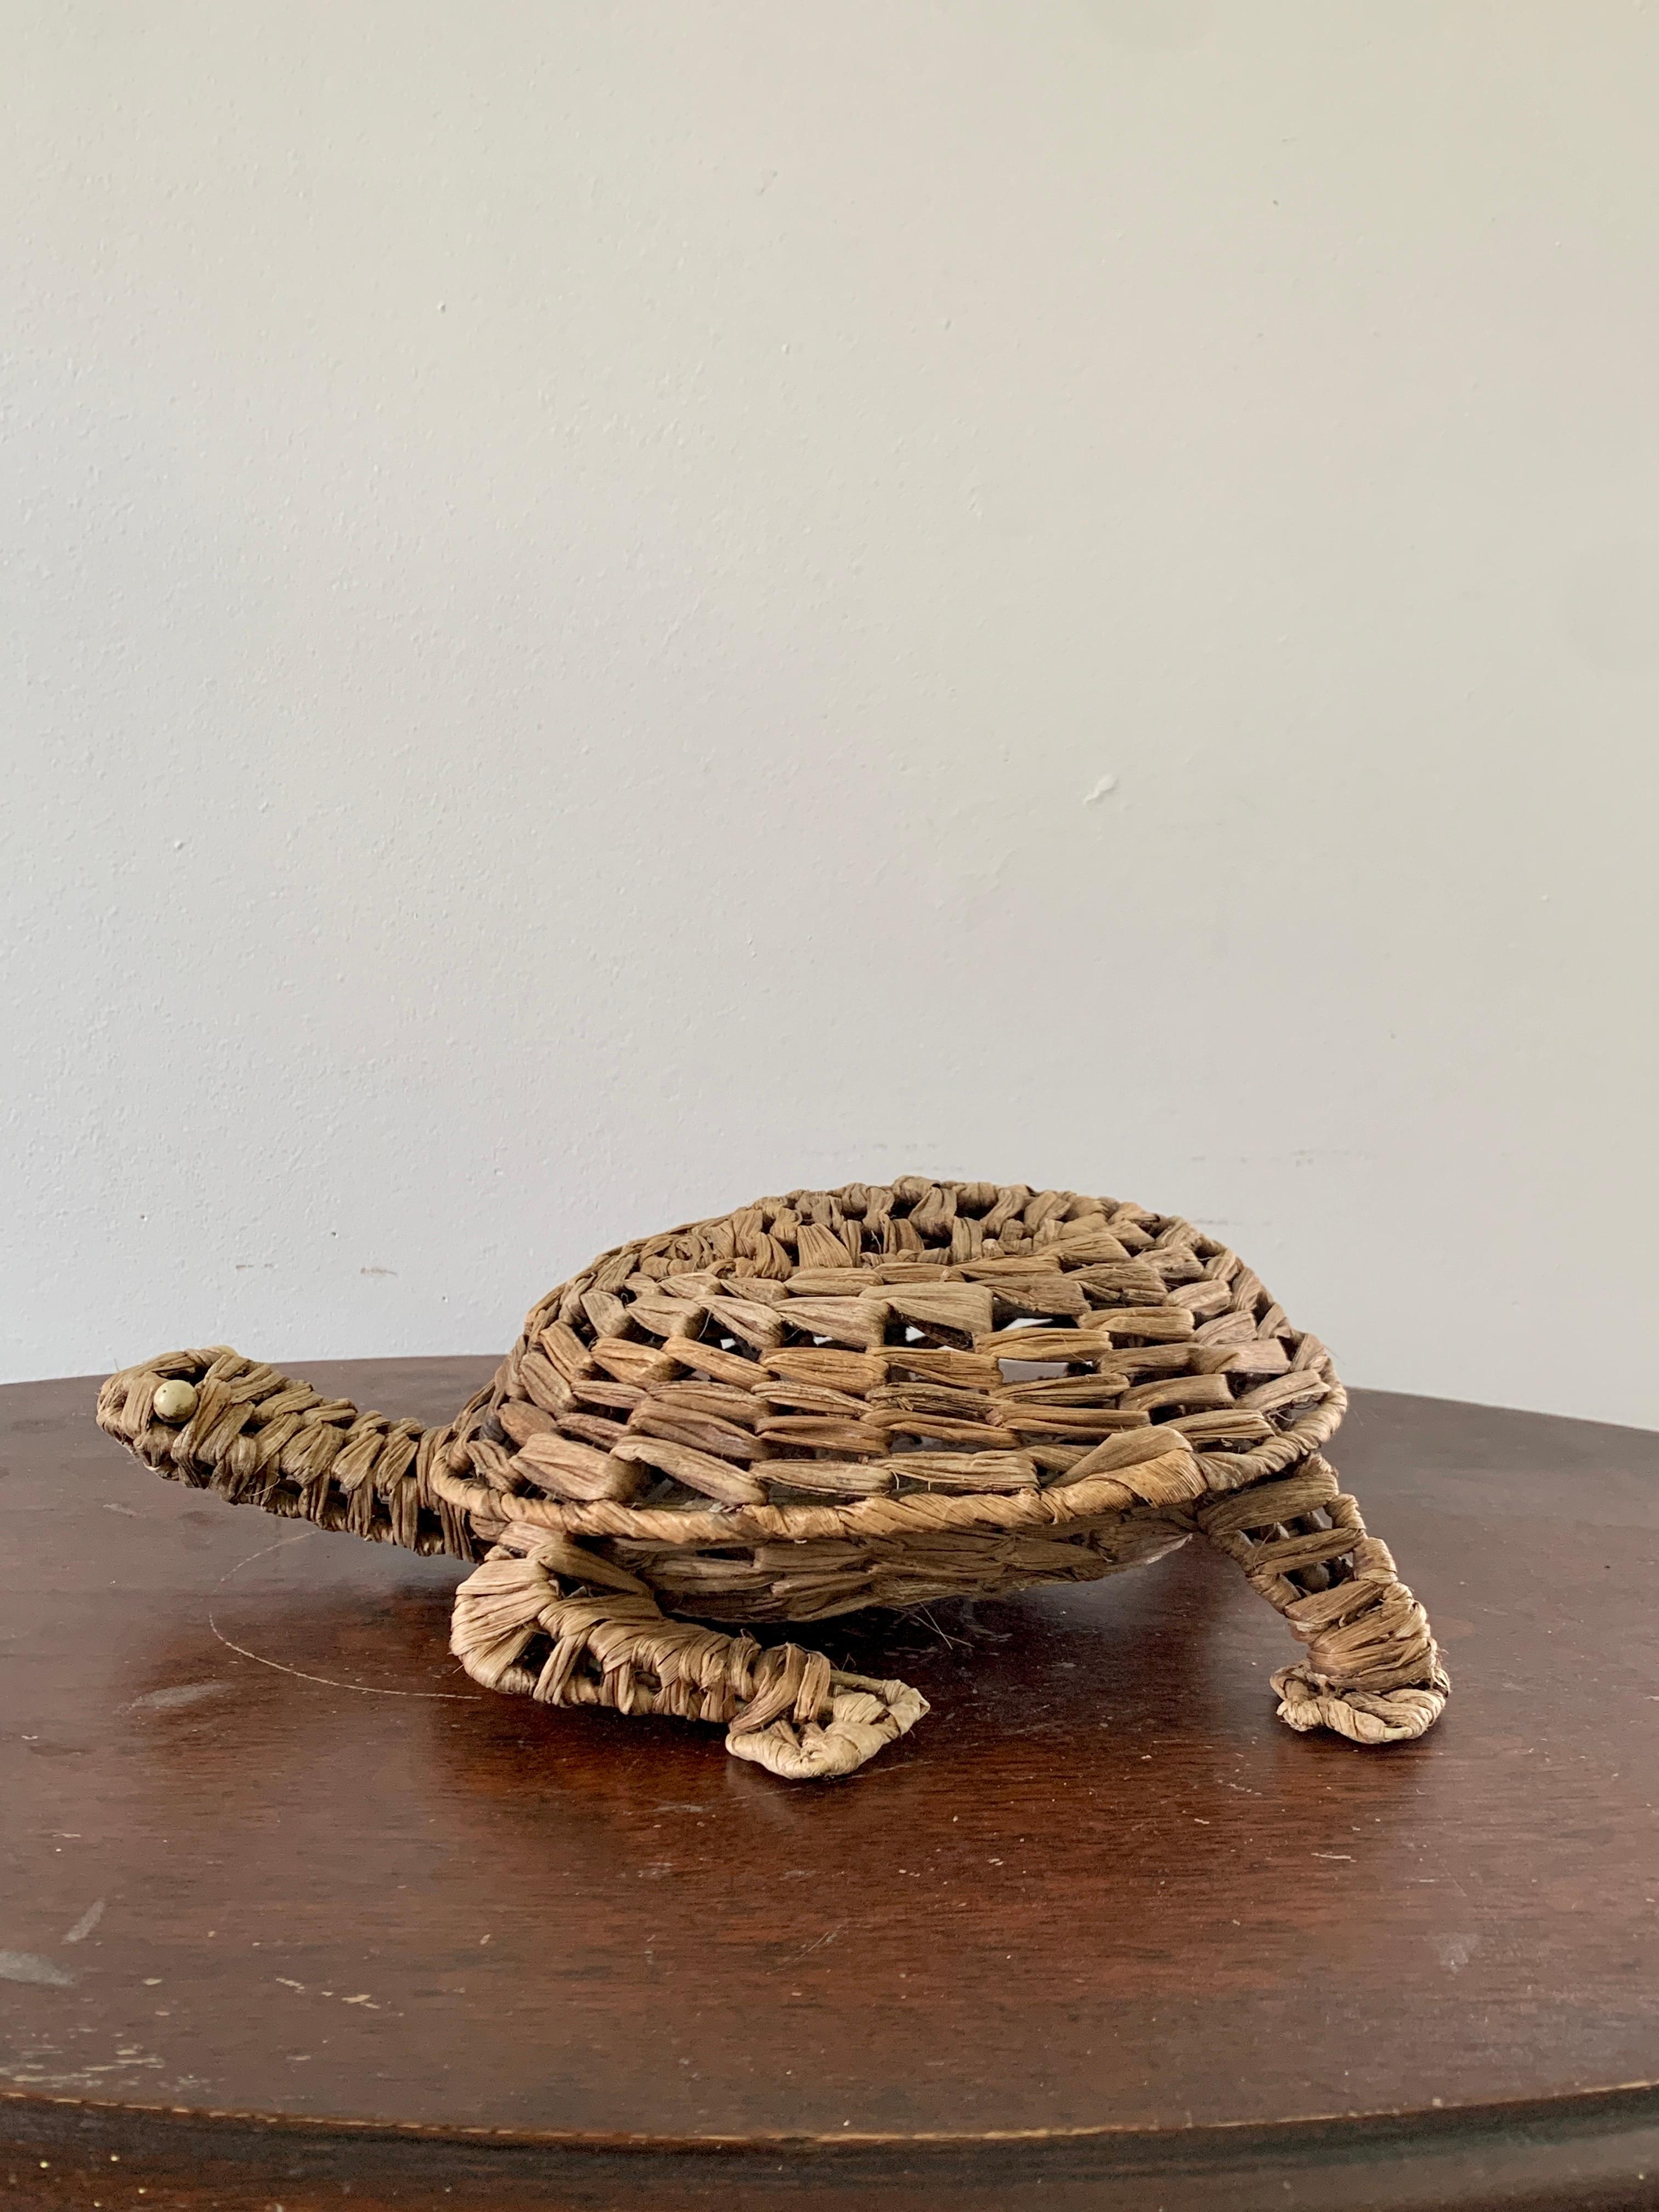 A charming woven wicker footstool in the form of a turtle, perfectly wonky to add character to any space. This piece could also be used as decor on a tabletop or shelf.

USA, Mid-20th Century

Measures: 14